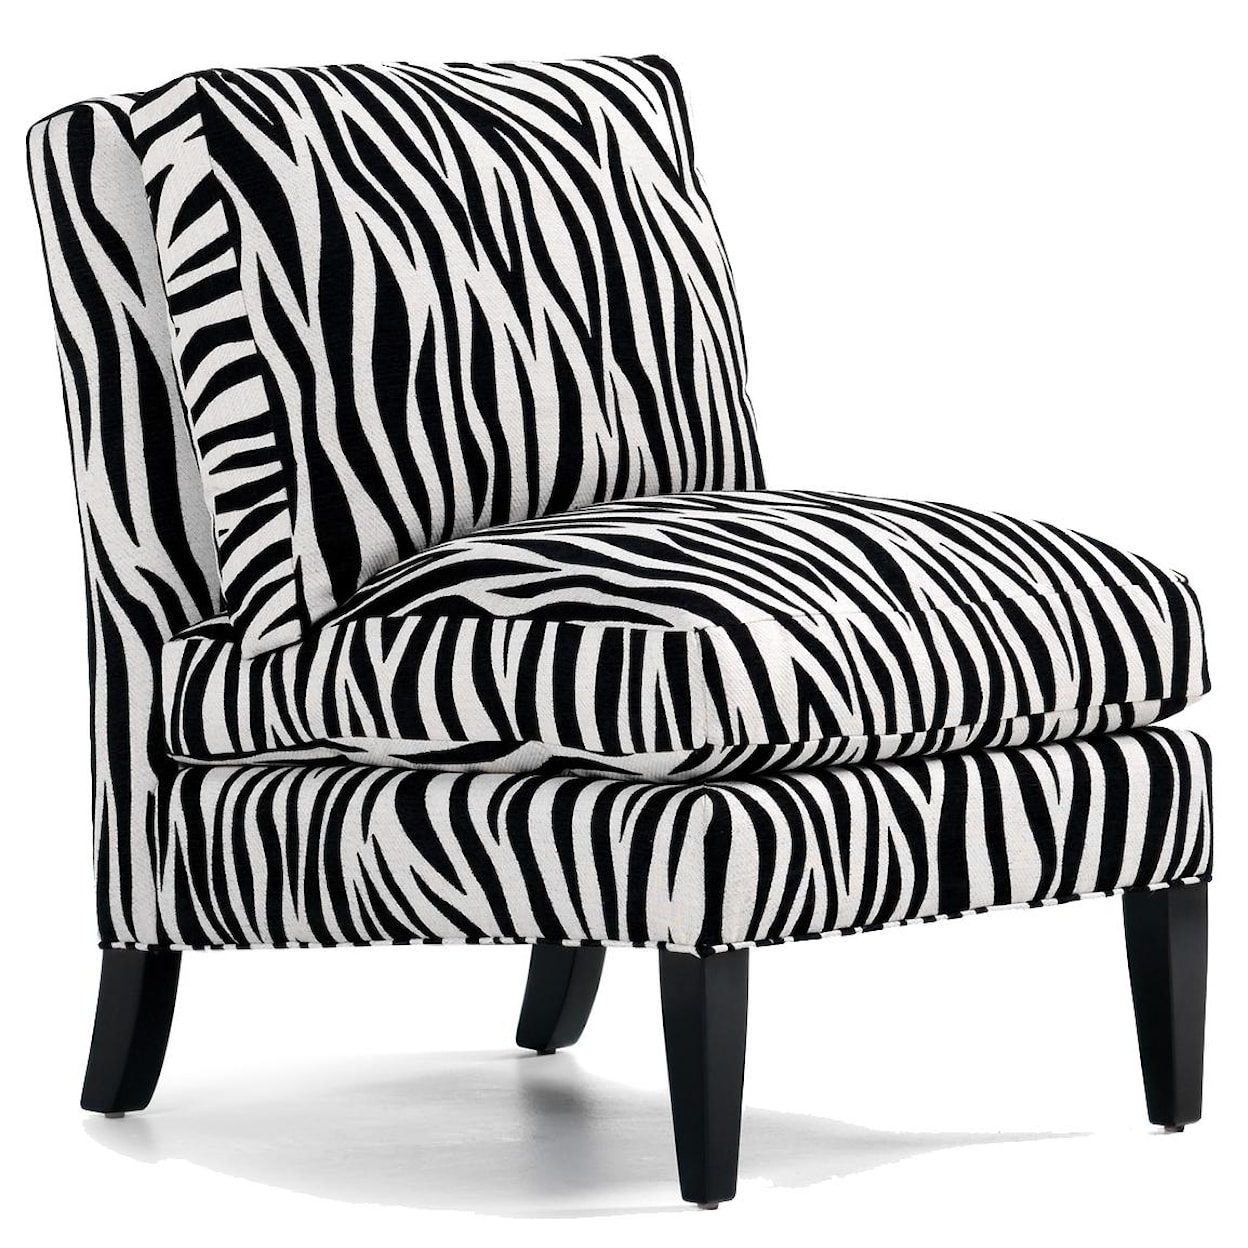 Jessica Charles Fine Upholstered Accents Carley Chair